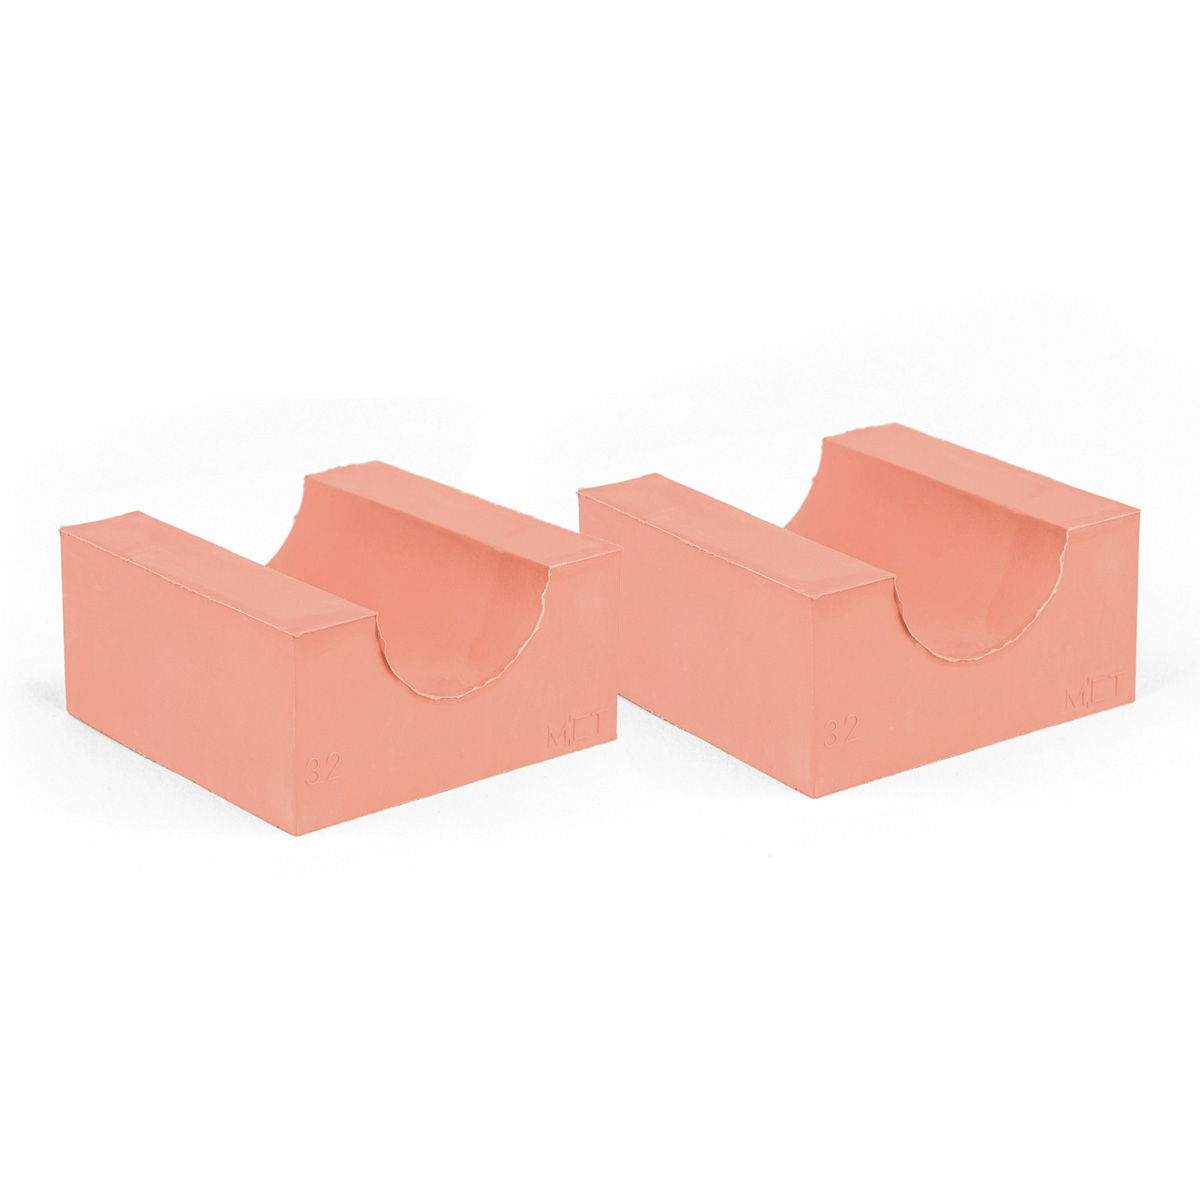 60-32*2 Set of 2 half insert block lycron 30mm, 60-32 for cable/pipe diam. 31,5-33.5mm